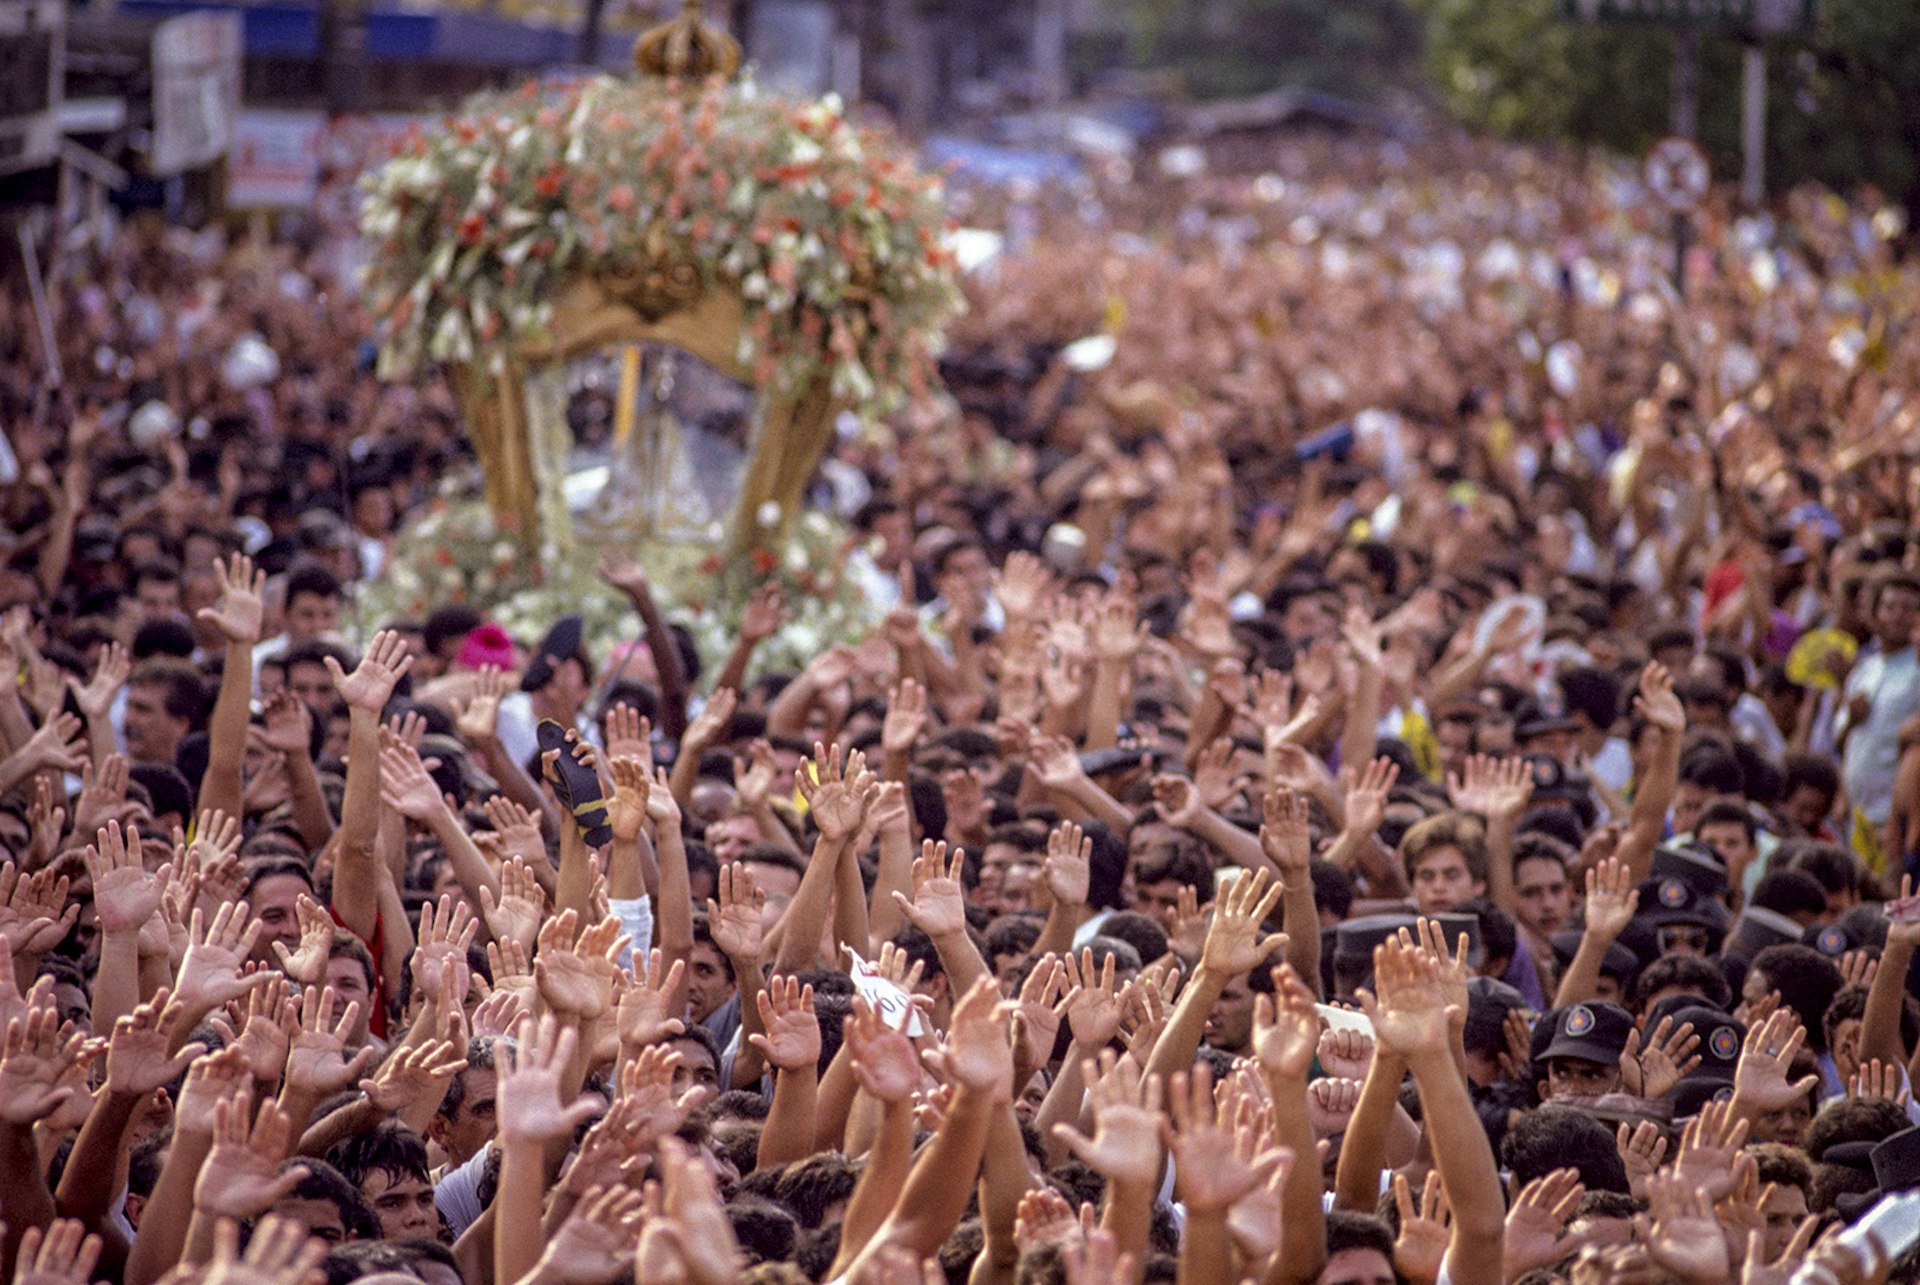 A dense crowd raises their hands to the air, with a religious altar in the background